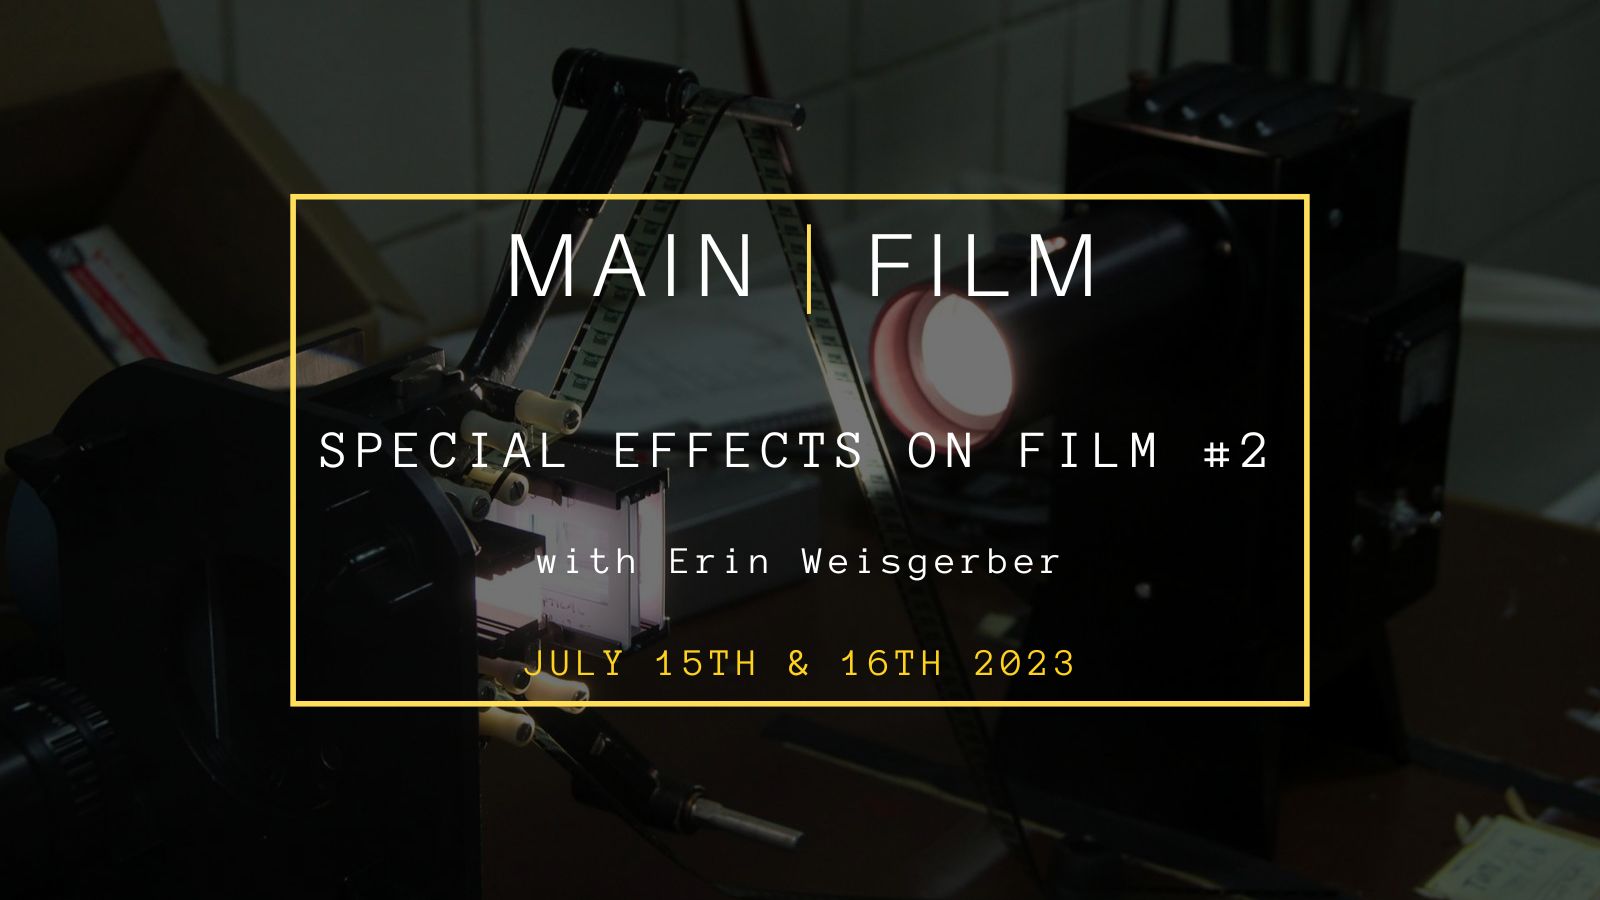 Special effects on film #2 | In-person